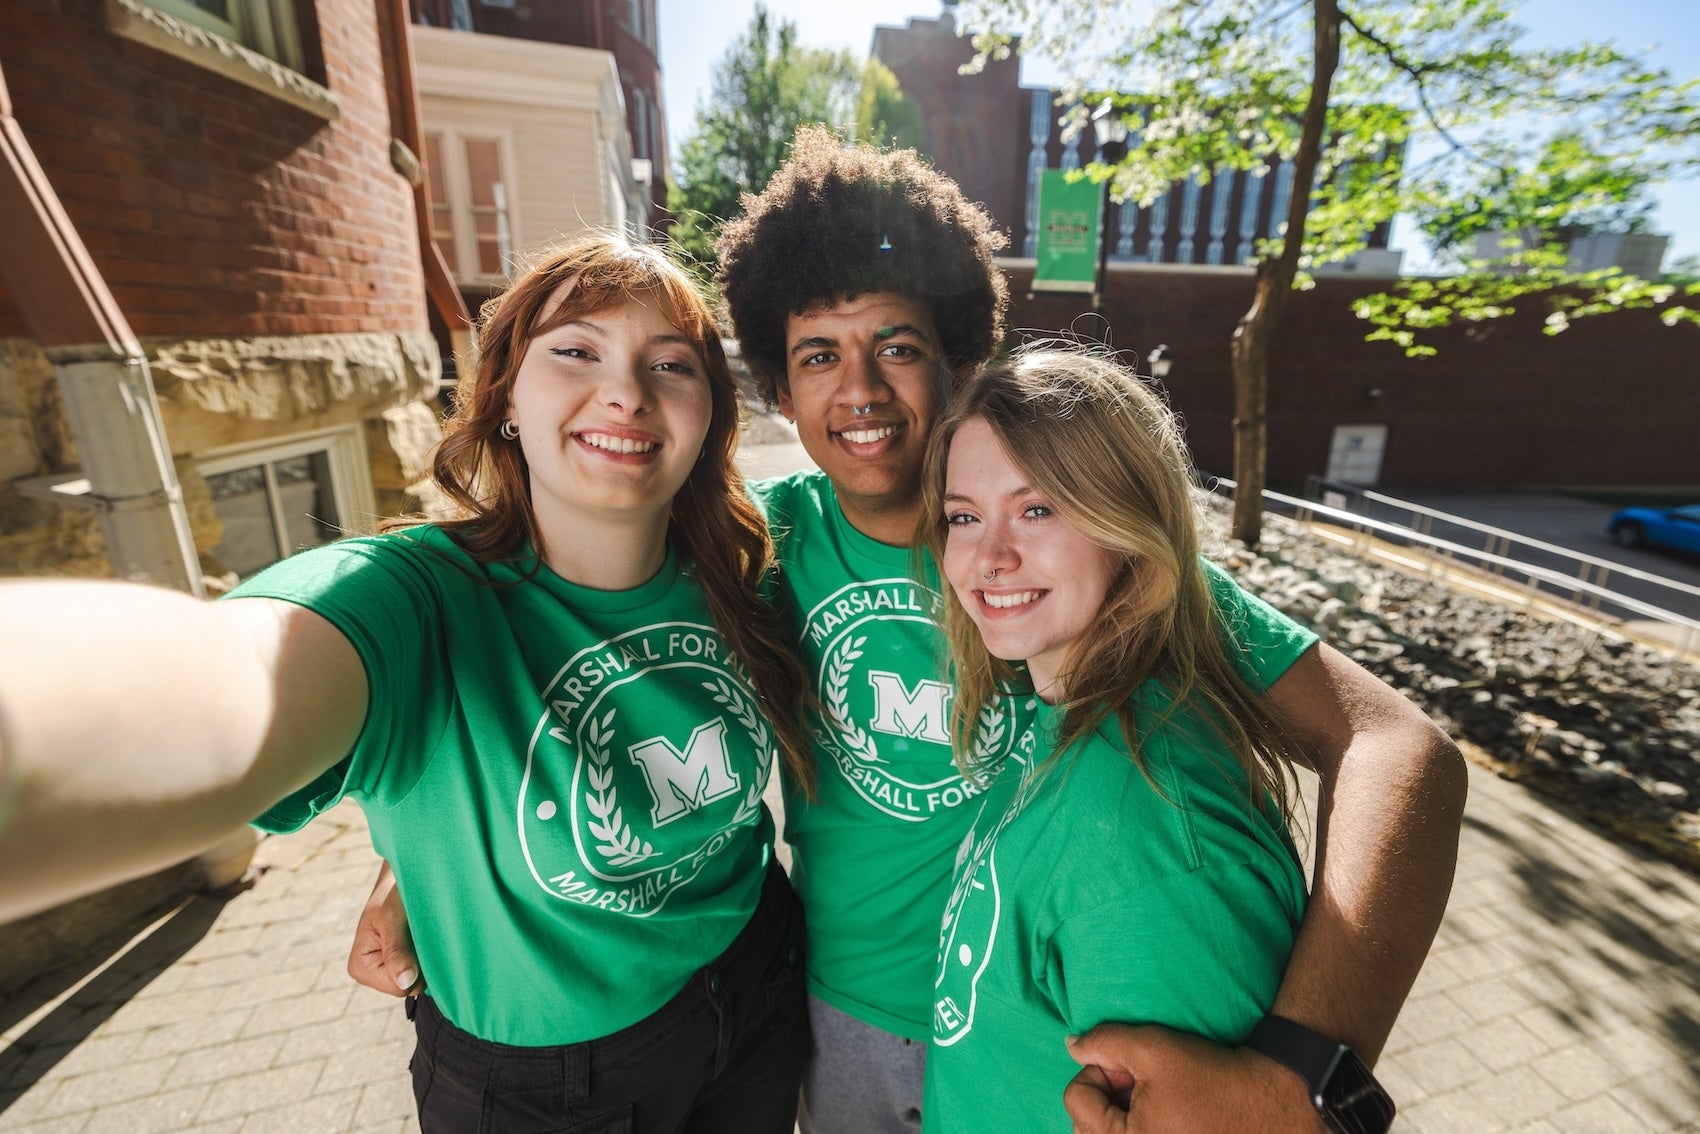 three Marshall For All students taking a selfie on campus